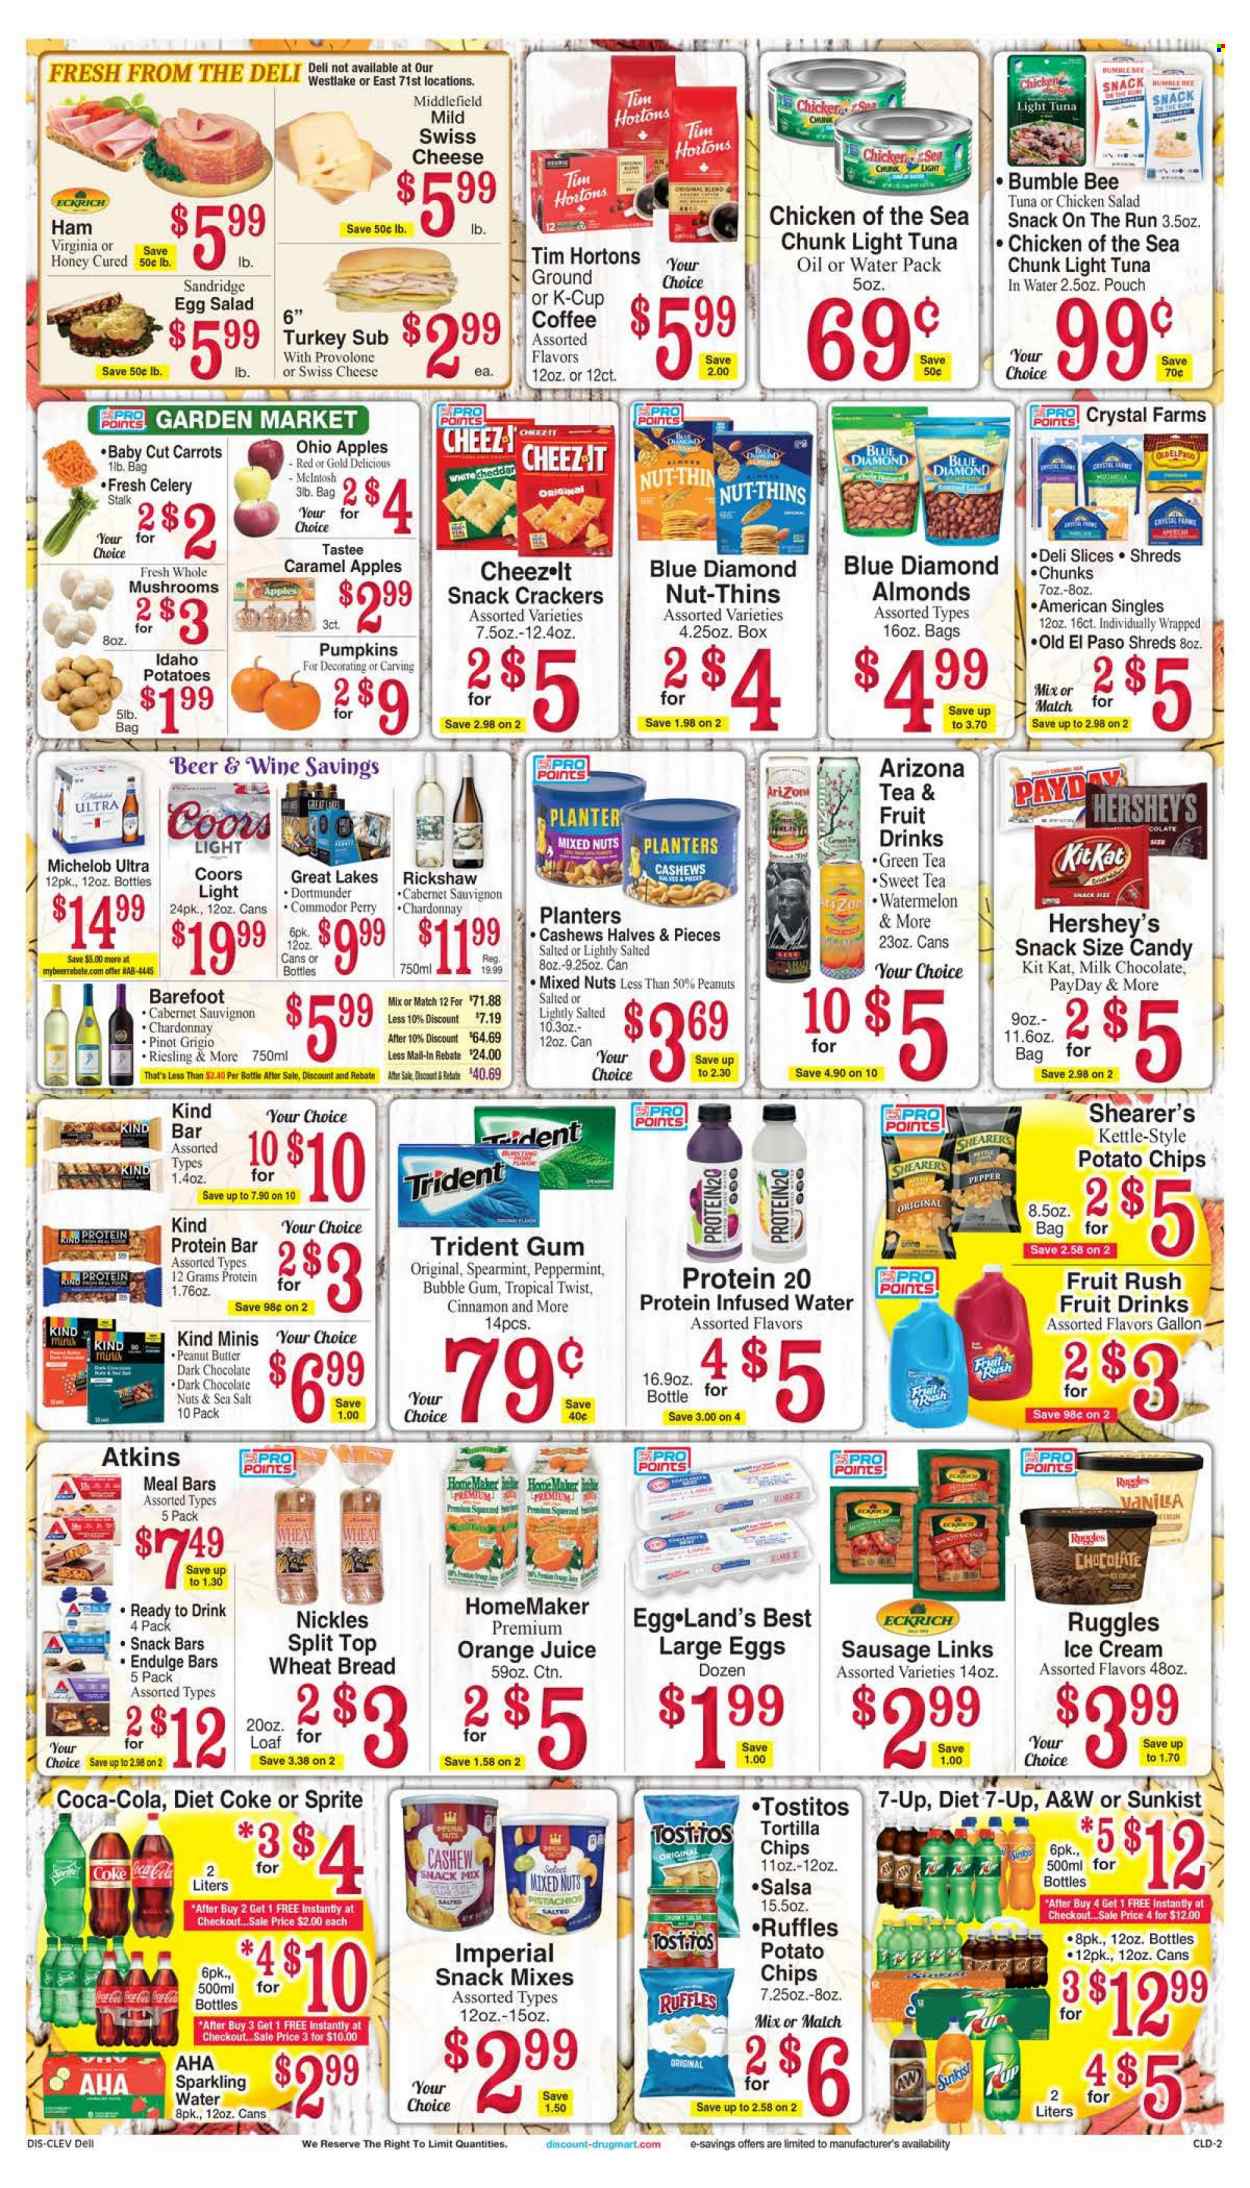 thumbnail - Discount Drug Mart Flyer - 09/15/2021 - 09/21/2021 - Sales products - mushrooms, wheat bread, Old El Paso, carrots, celery, pumpkin, salad, apples, watermelon, tuna, Bumble Bee, ham, sausage, chicken salad, swiss cheese, cheese, Provolone, large eggs, Hershey's, milk chocolate, snack, KitKat, bubblegum, crackers, dark chocolate, Trident, snack bar, Shearer’s, tortilla chips, potato chips, chips, Thins, Ruffles, Tostitos, tuna in water, light tuna, Chicken of the Sea, protein bar, cinnamon, caramel, salsa, honey, peanut butter, almonds, cashews, peanuts, pistachios, mixed nuts, Planters, Blue Diamond, Coca-Cola, Sprite, orange juice, juice, Diet Coke, 7UP, AriZona, A&W, sparkling water, green tea, coffee, coffee capsules, K-Cups, Cabernet Sauvignon, red wine, Riesling, white wine, Chardonnay, wine, Pinot Grigio, sake, beer, pan, Coors, Michelob. Page 2.